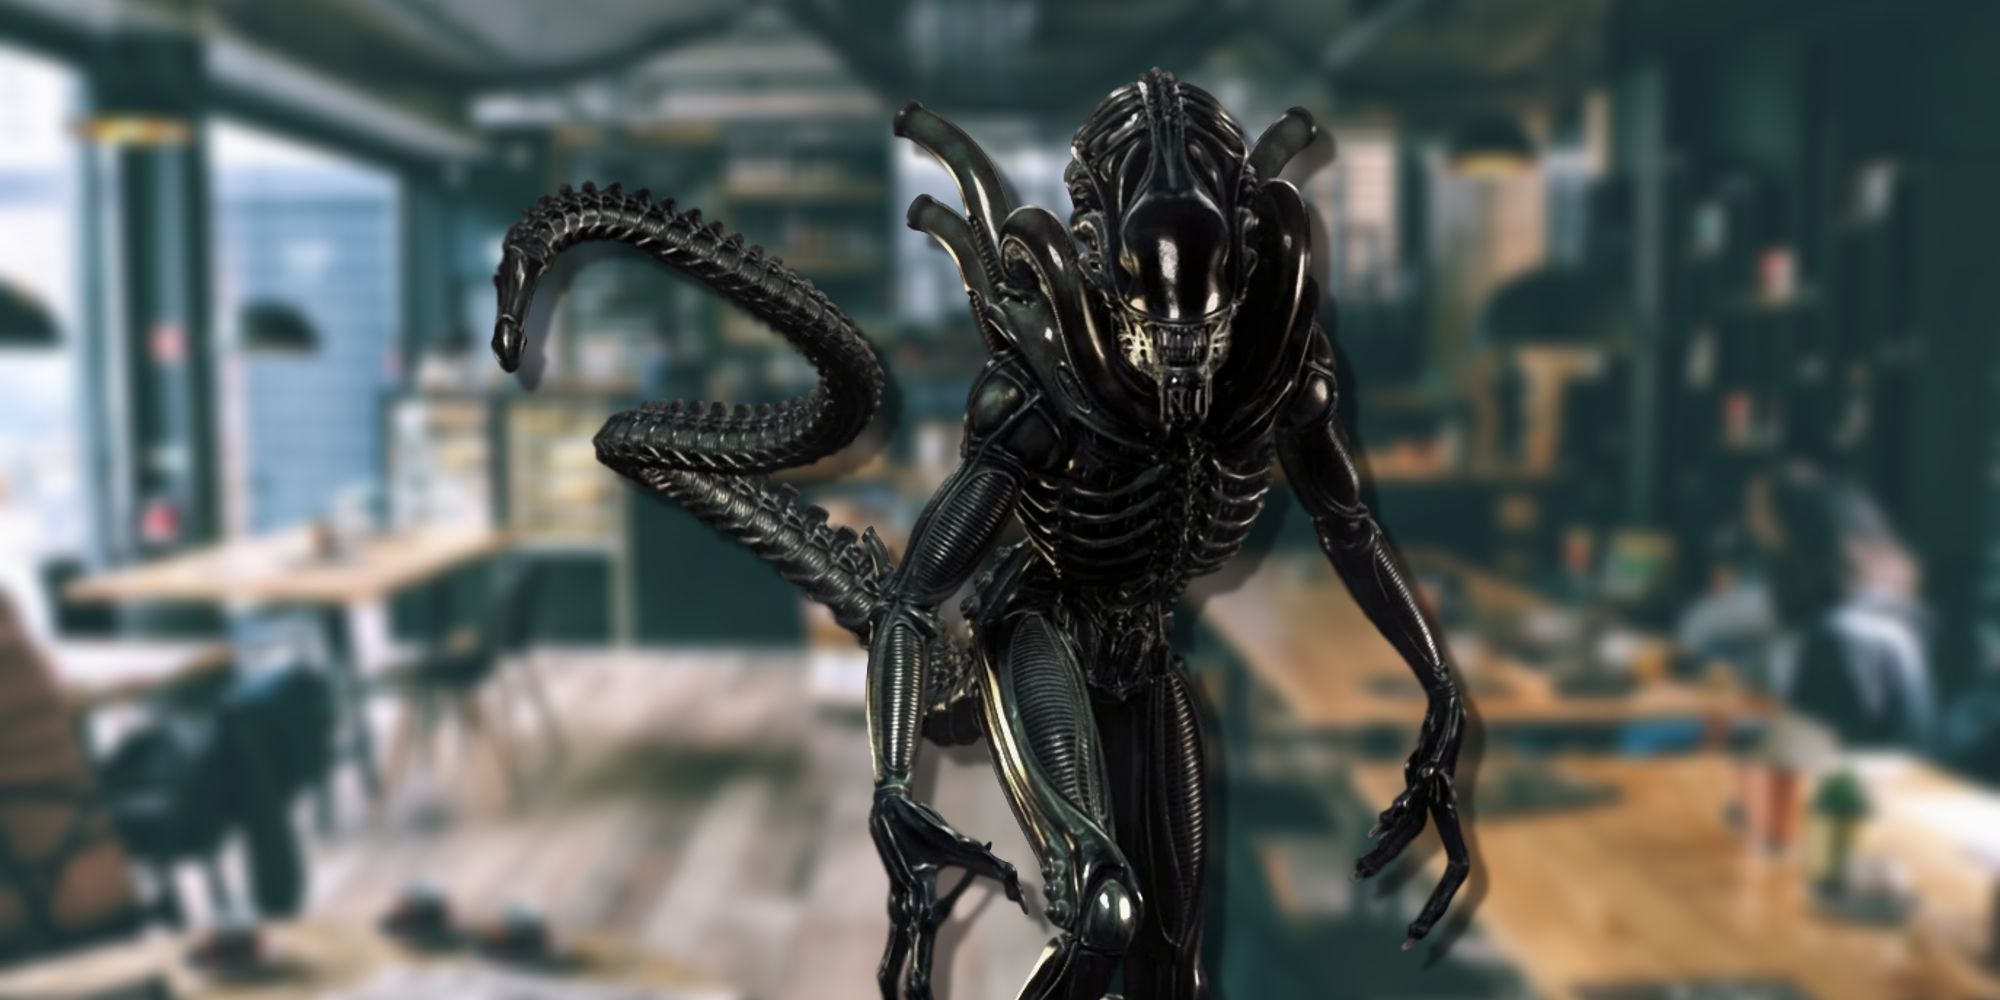 Fall Activities To Do With Horror Game Monsters Xenomorph Alien Isolation